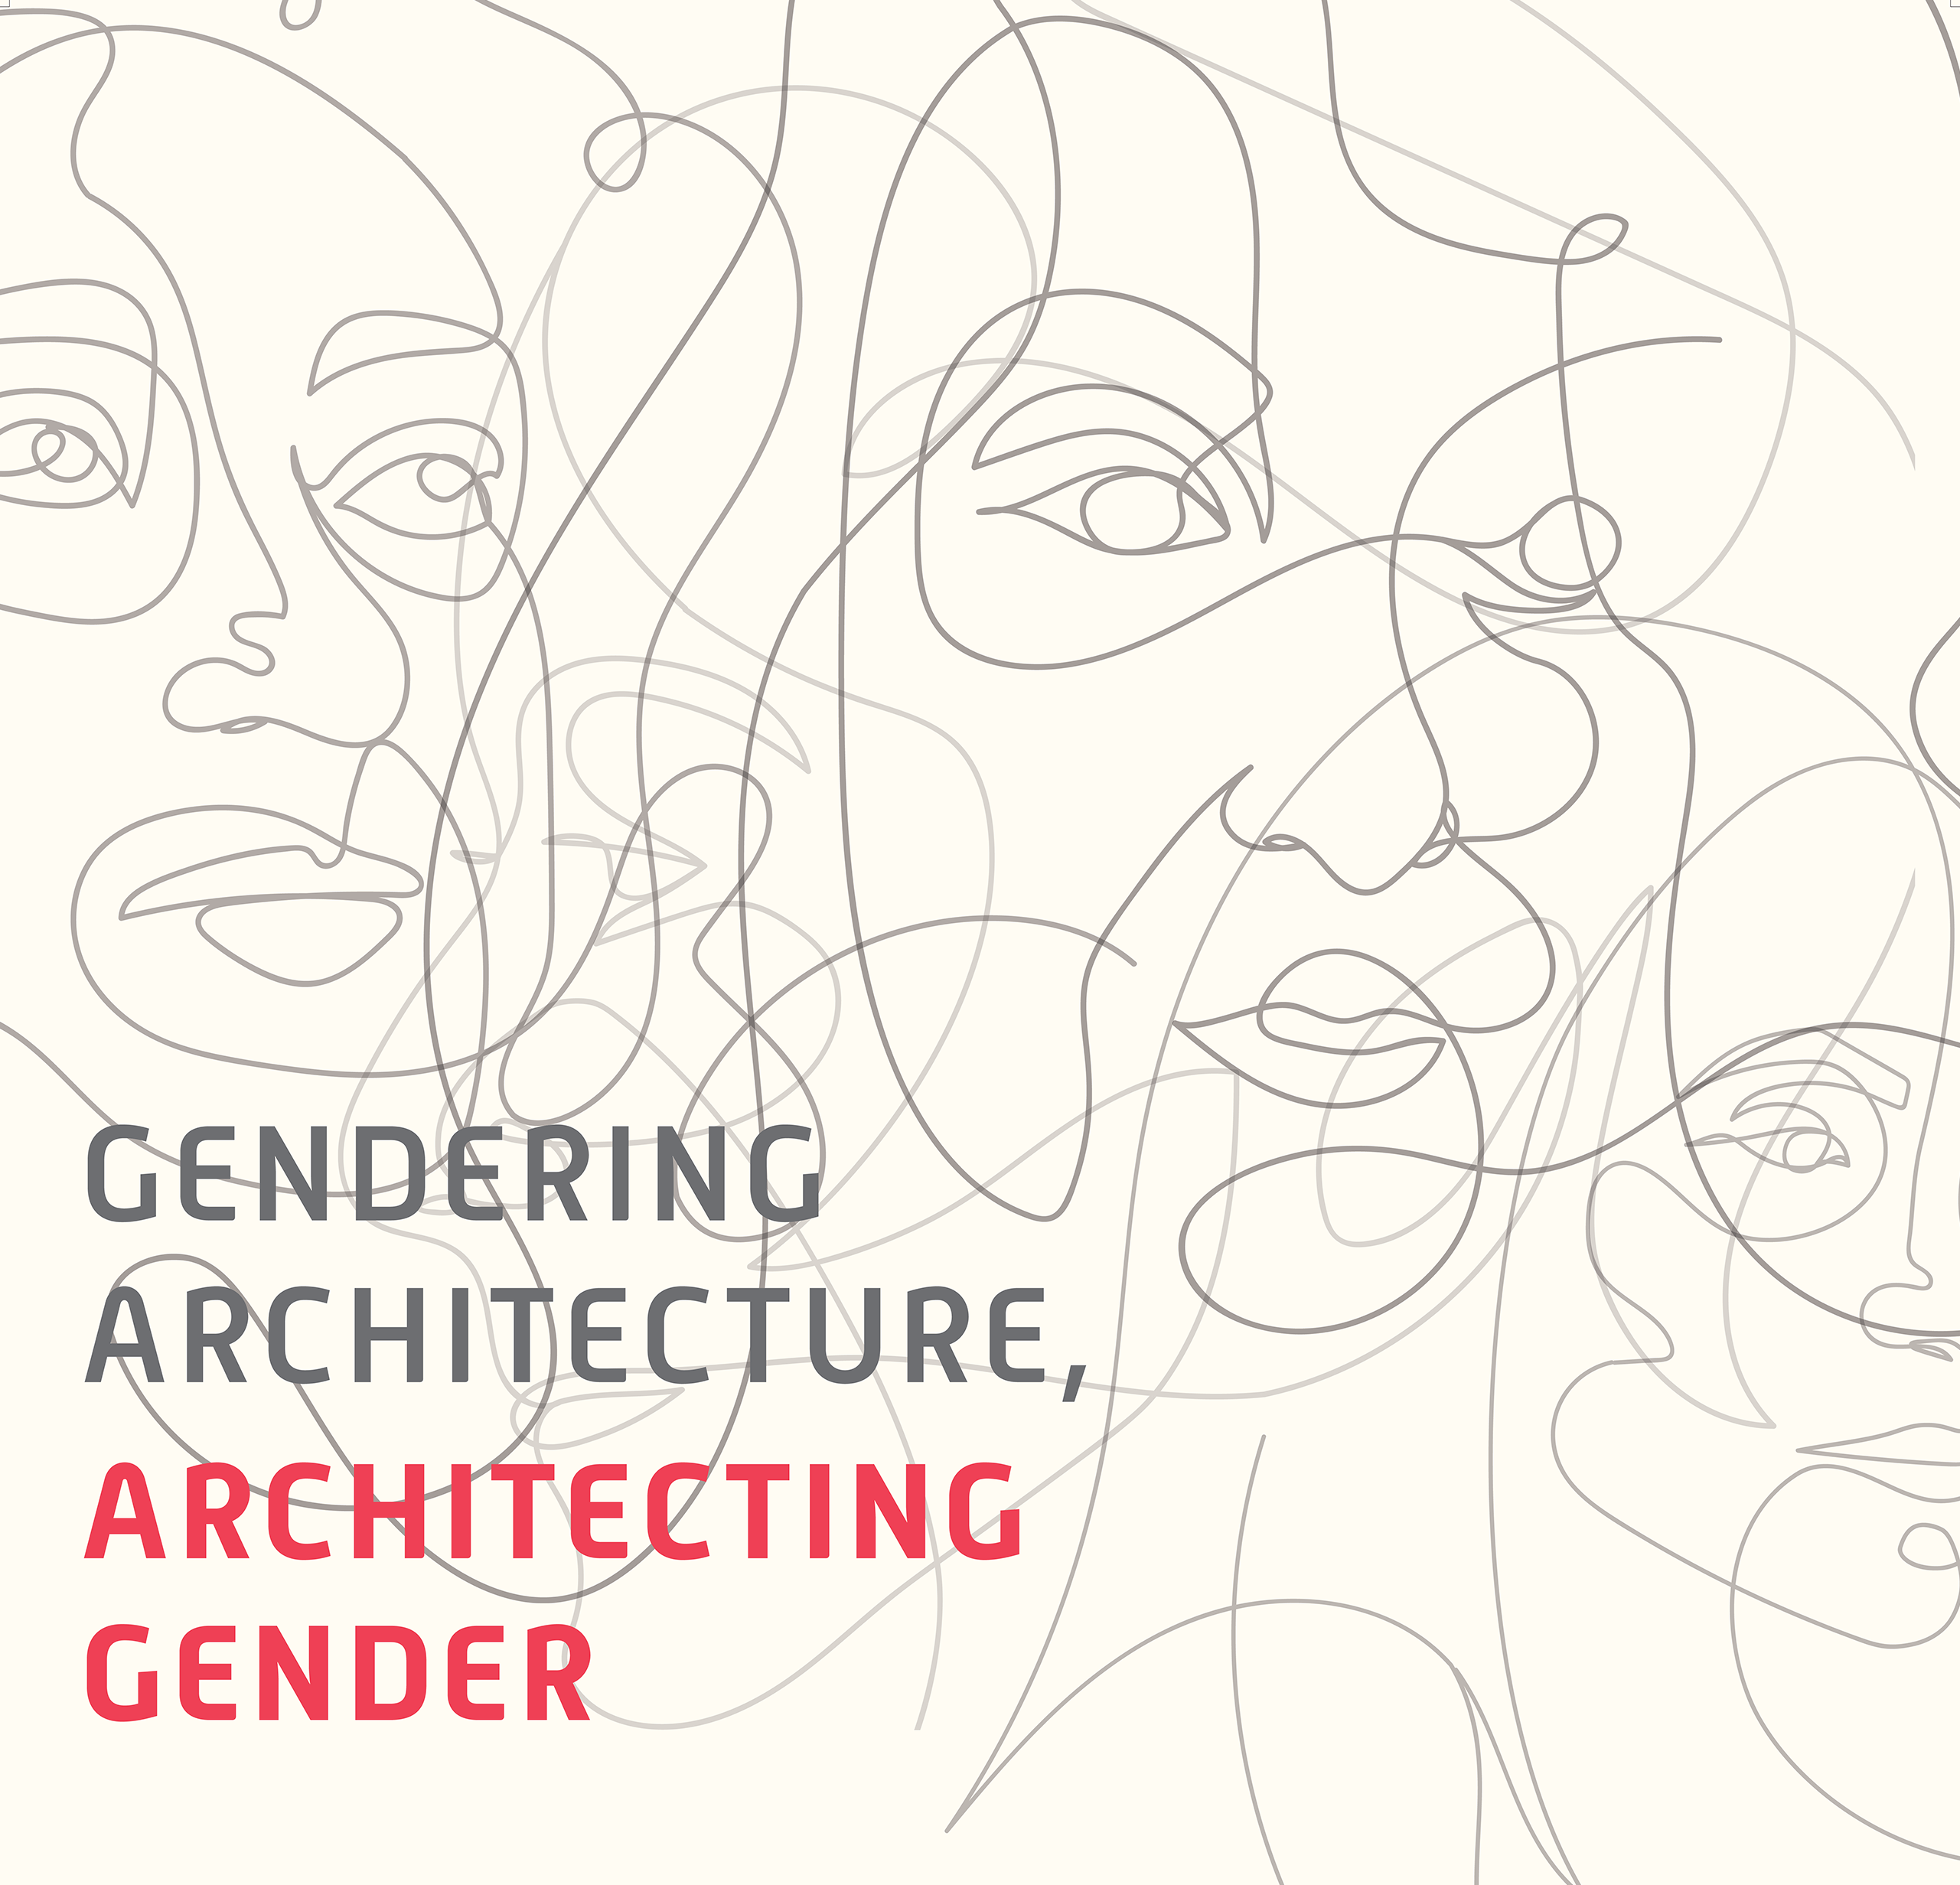 Gendering Architecture, Architecting Gender line drawings of female identifying people's faces